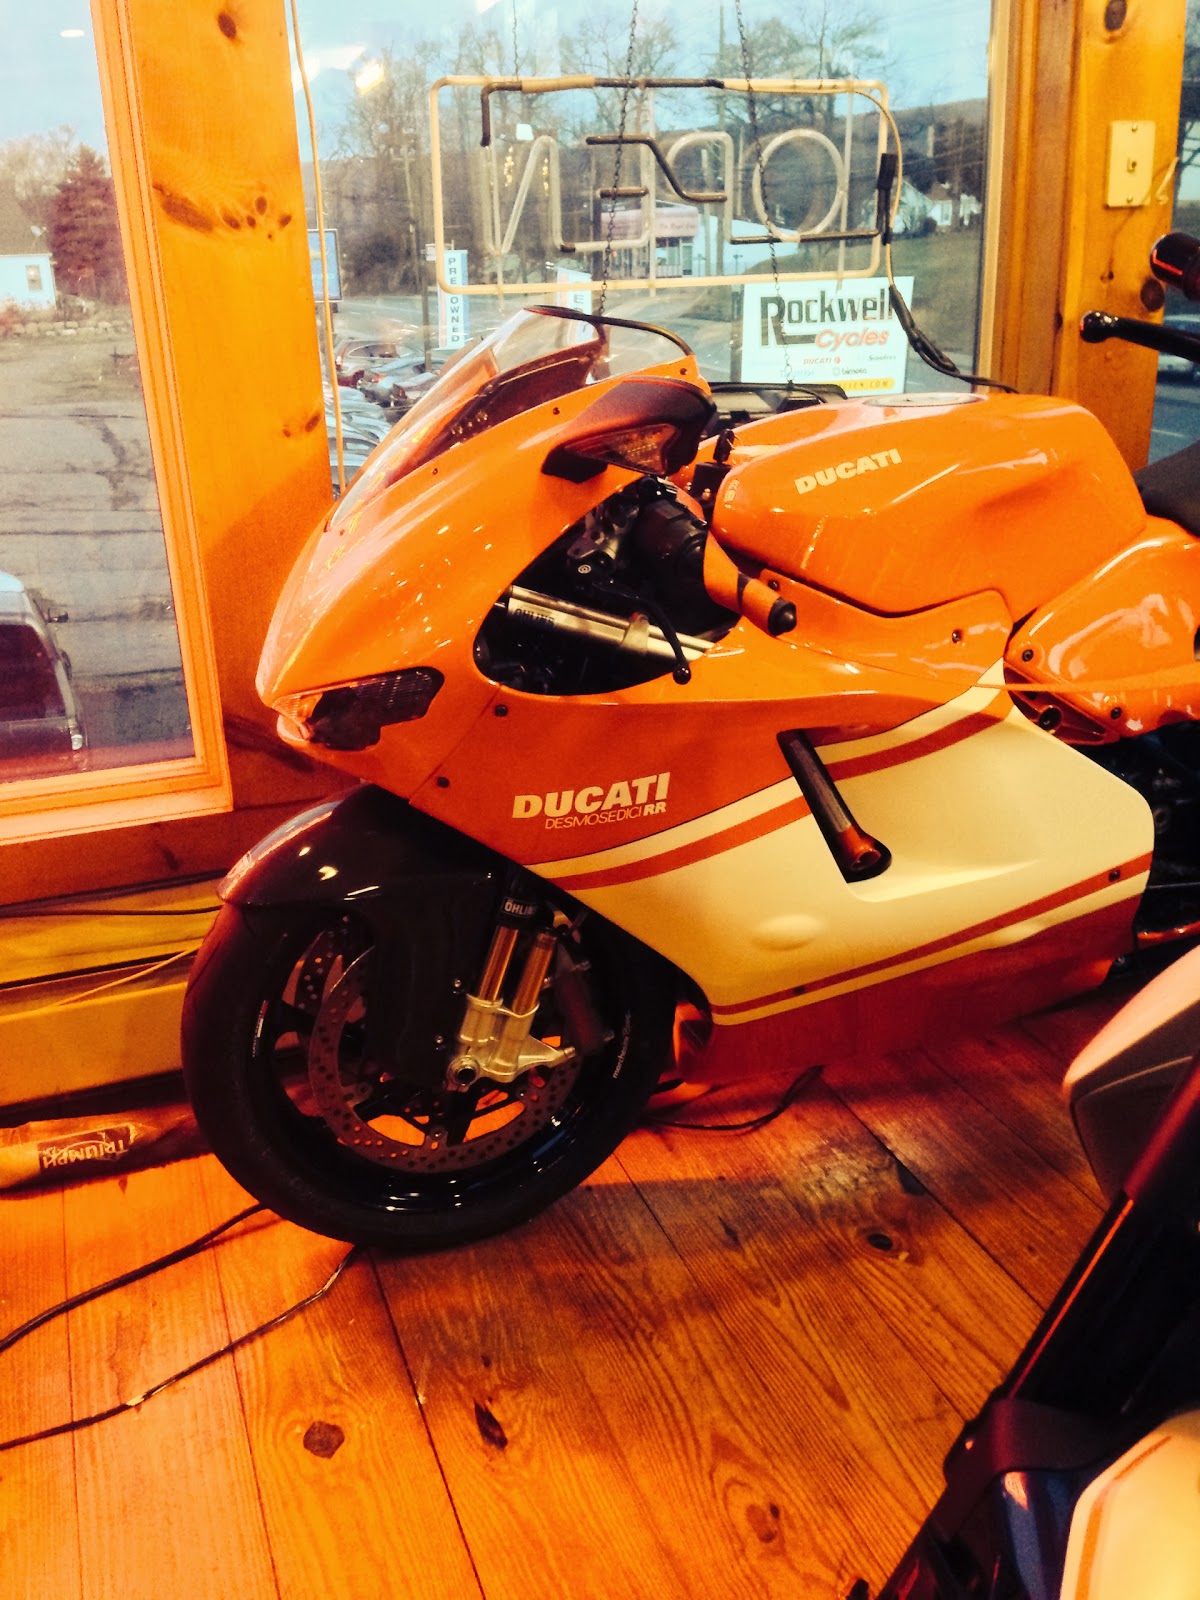 Ducati Desmosedici RR on Display for Tigho NYDucati at Rockwell Cycle during the day